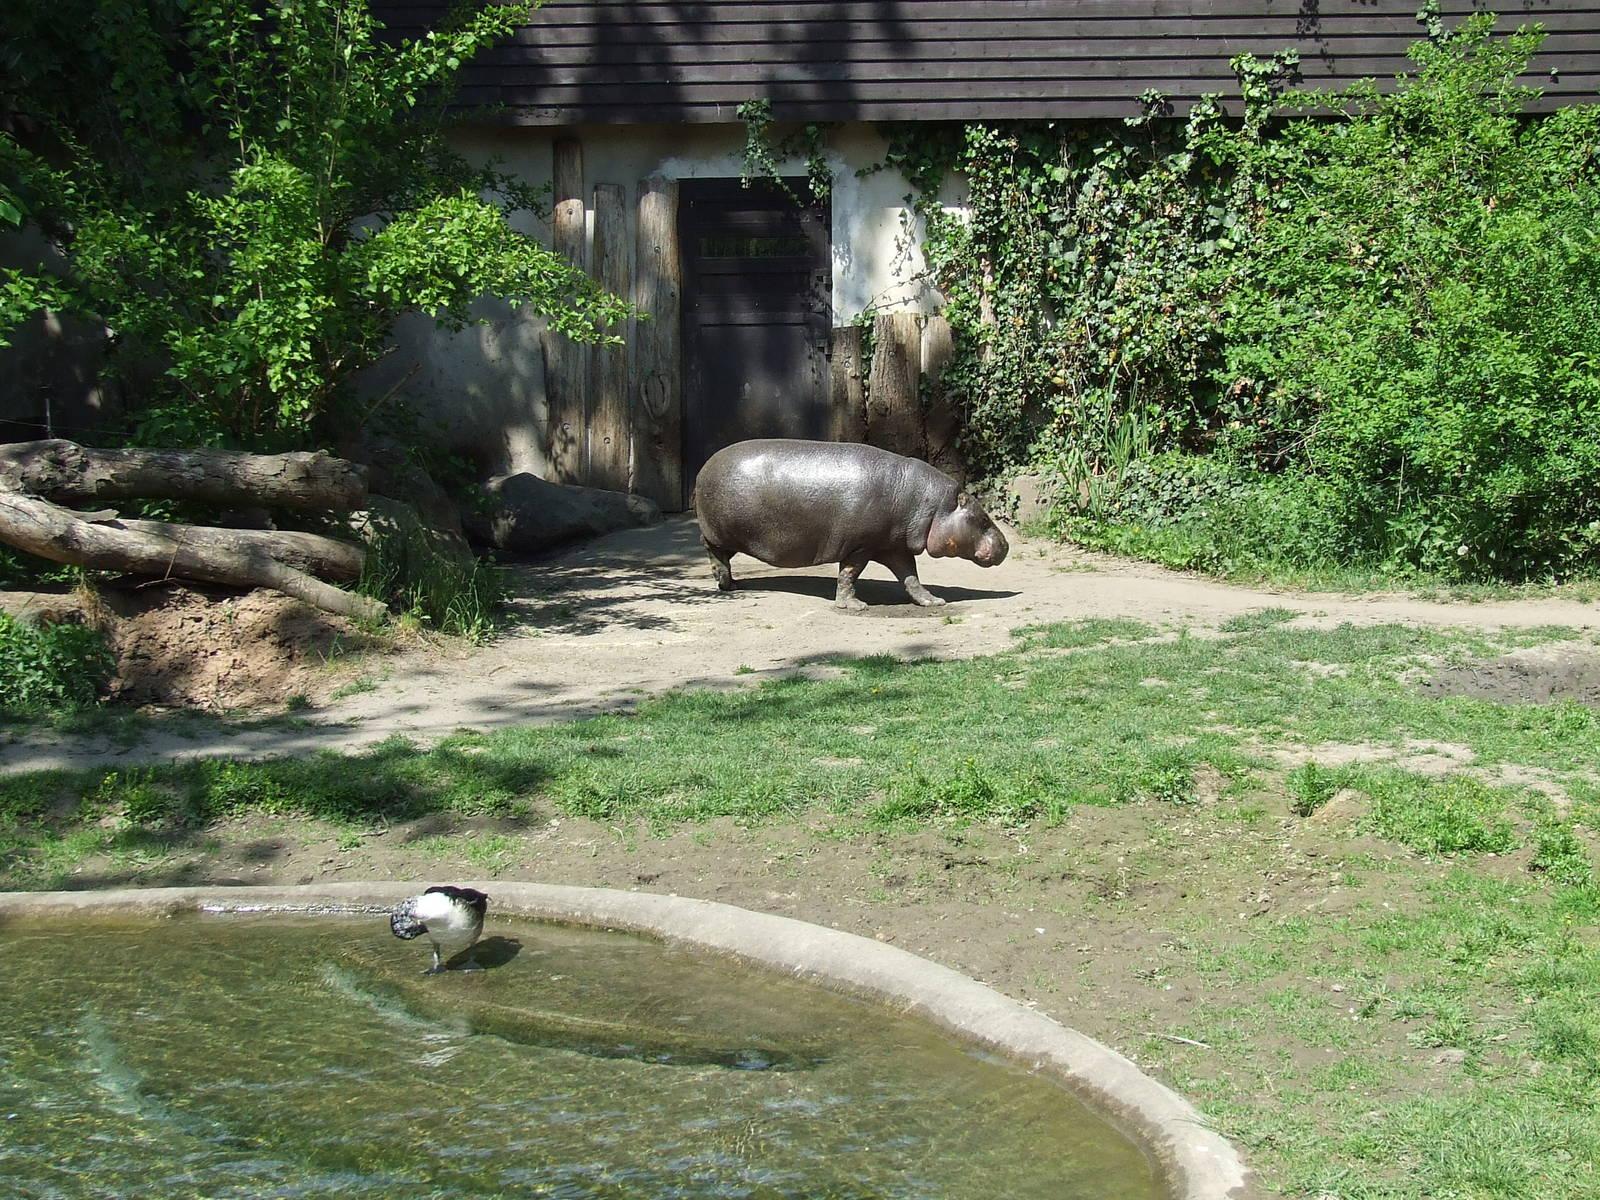 Pygmy Hippo enclosure and house